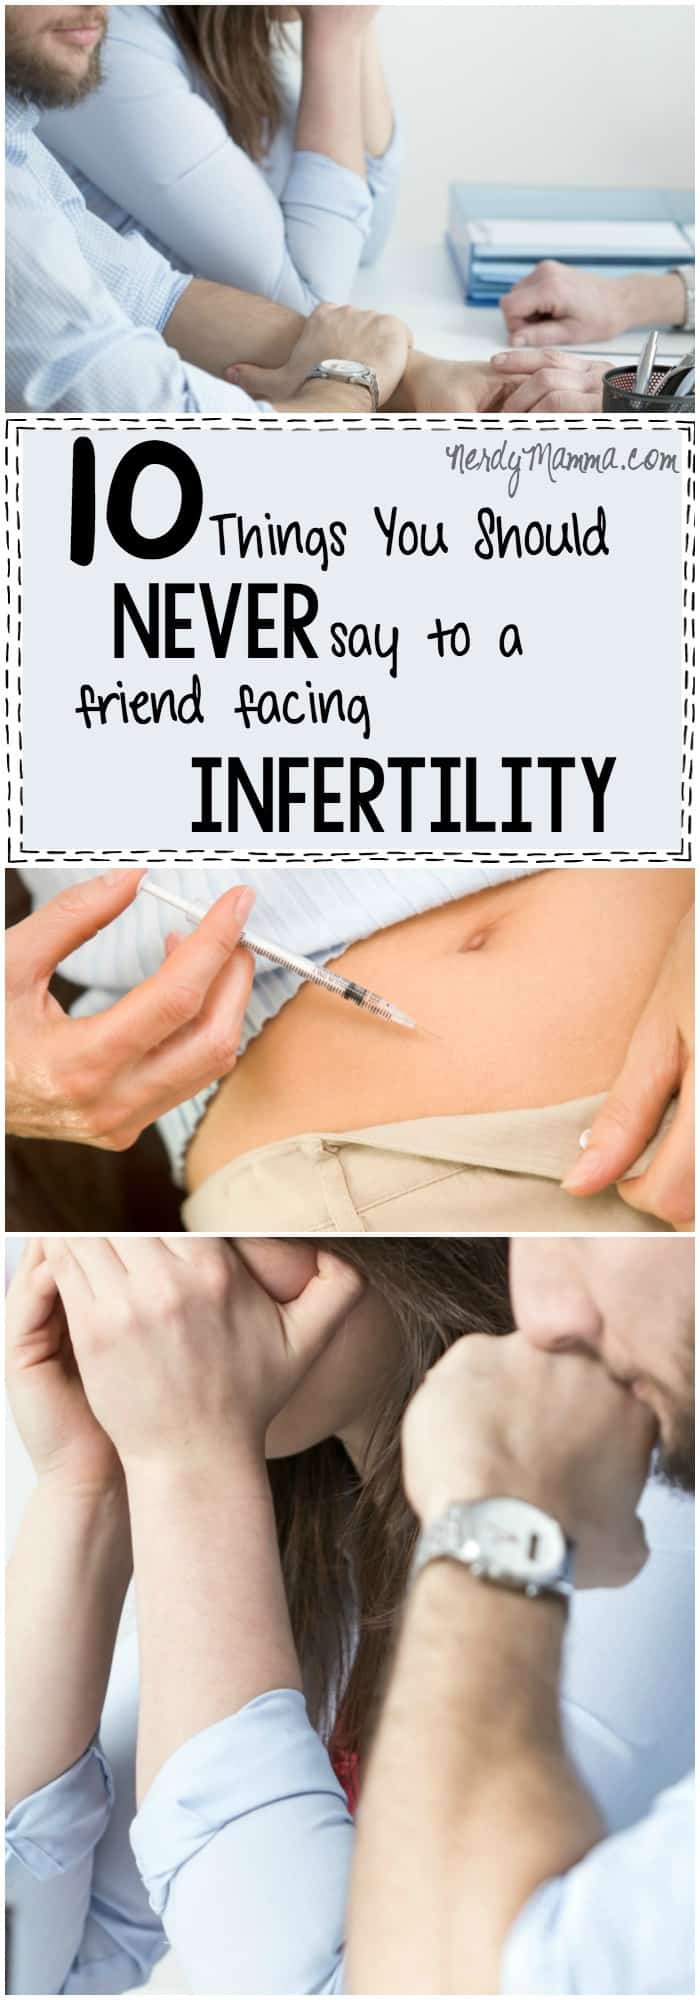 This is such a truth-filled statement. 10 Things You Should Never Say to a Friend Facing Infertility. Because it's really hard...